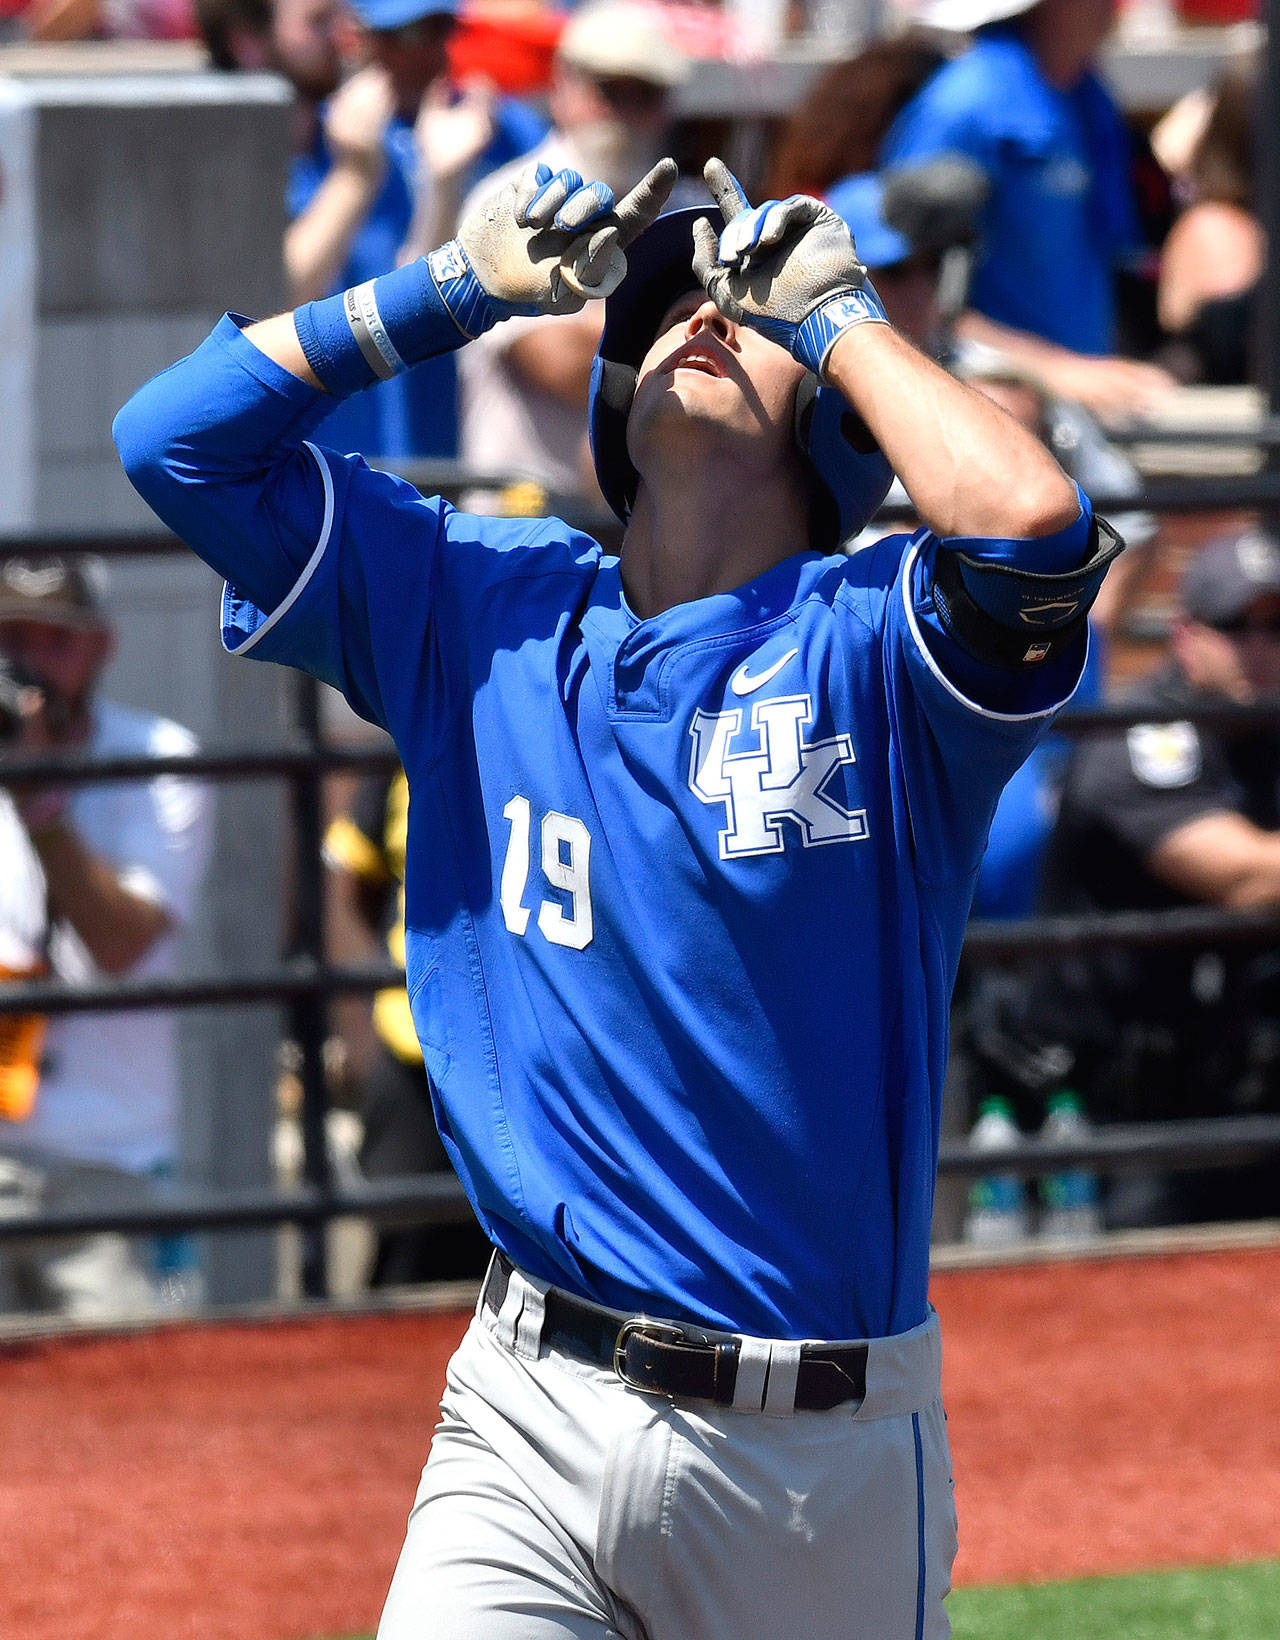 Kentucky’s Evan White points skyward as he crosses home plate after hitting a solo home run in the ninth inning during Friday in an NCAA Super Regional game against Louisville. (AP Photo / Timothy D. Easley)